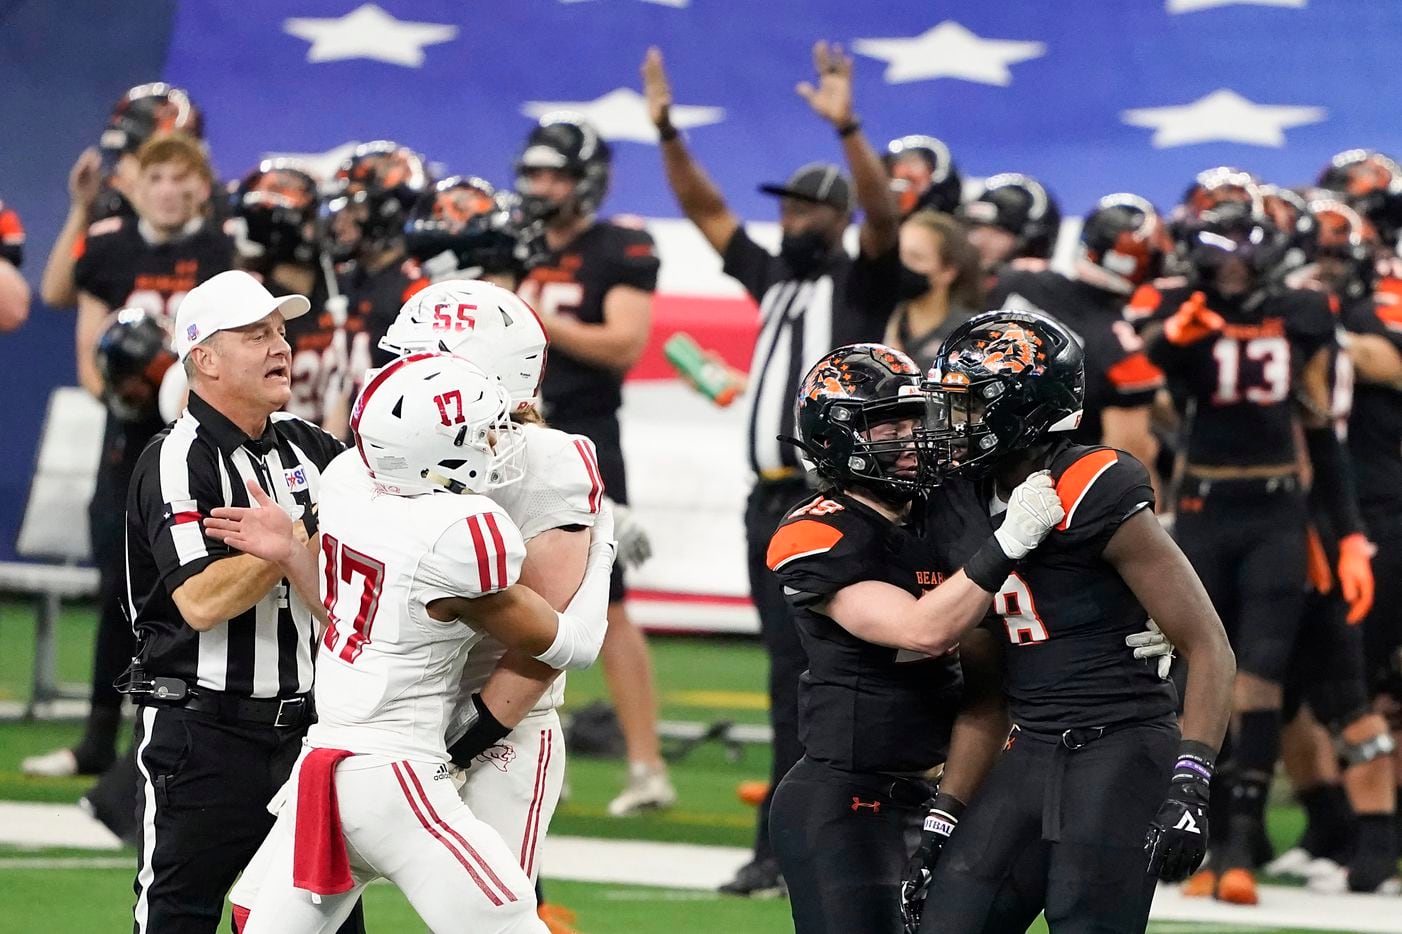 Teammates and officials race to separate Crosby offensive lineman Tyler Thomas (55) from Aledo defensive lineman Chris Wright (8), who were both penalized on the play, during the first half of the Class 5A Division II state football championship game at AT&T Stadium on Friday, Jan. 15, 2021, in Arlington. (Smiley N. Pool/The Dallas Morning News)